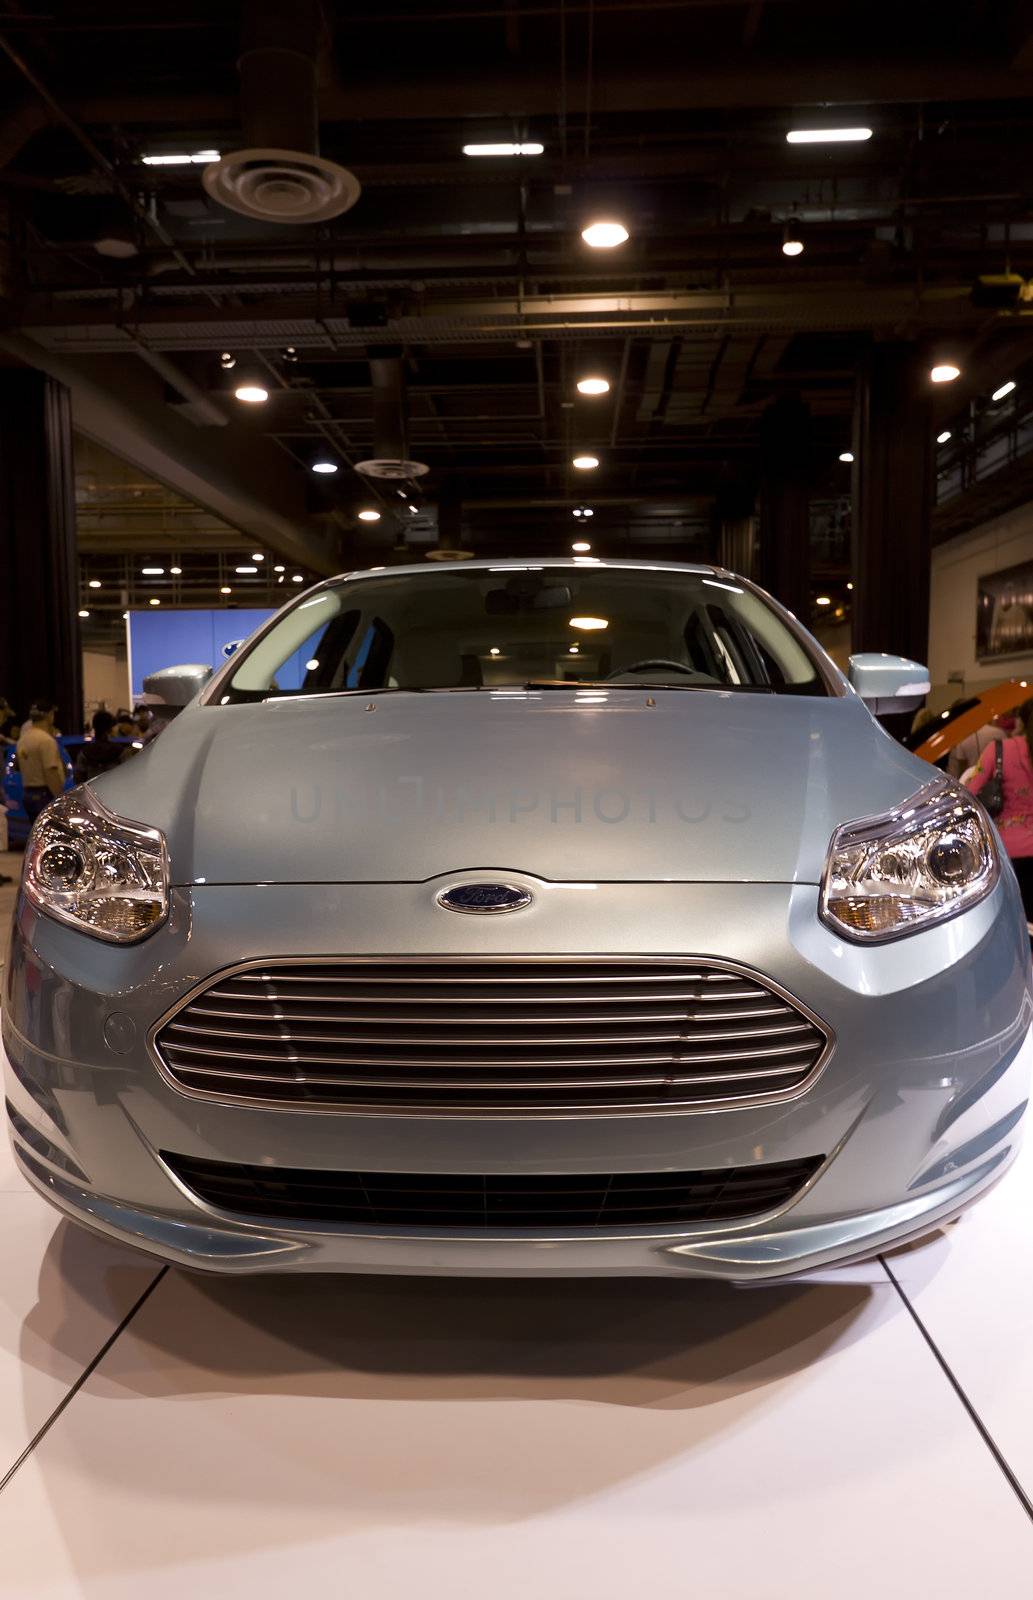 Ford Focus Electric Car Front by Moonb007